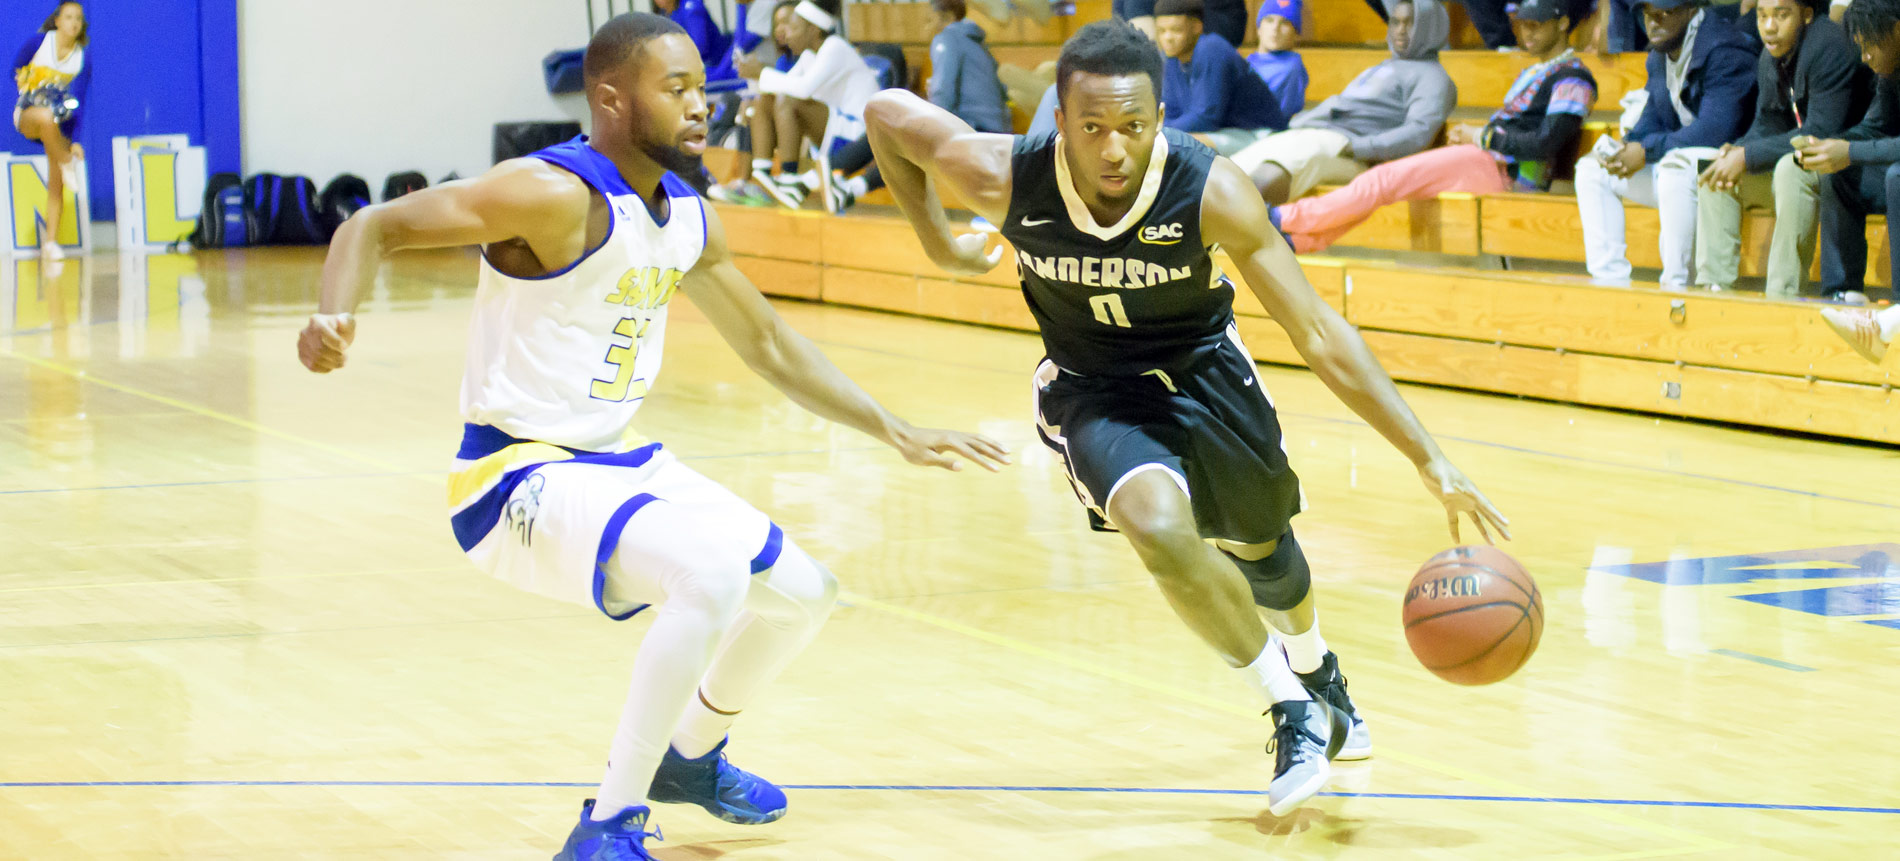 Trojans Get Past Tusculum Behind Shaw’s 26 Points